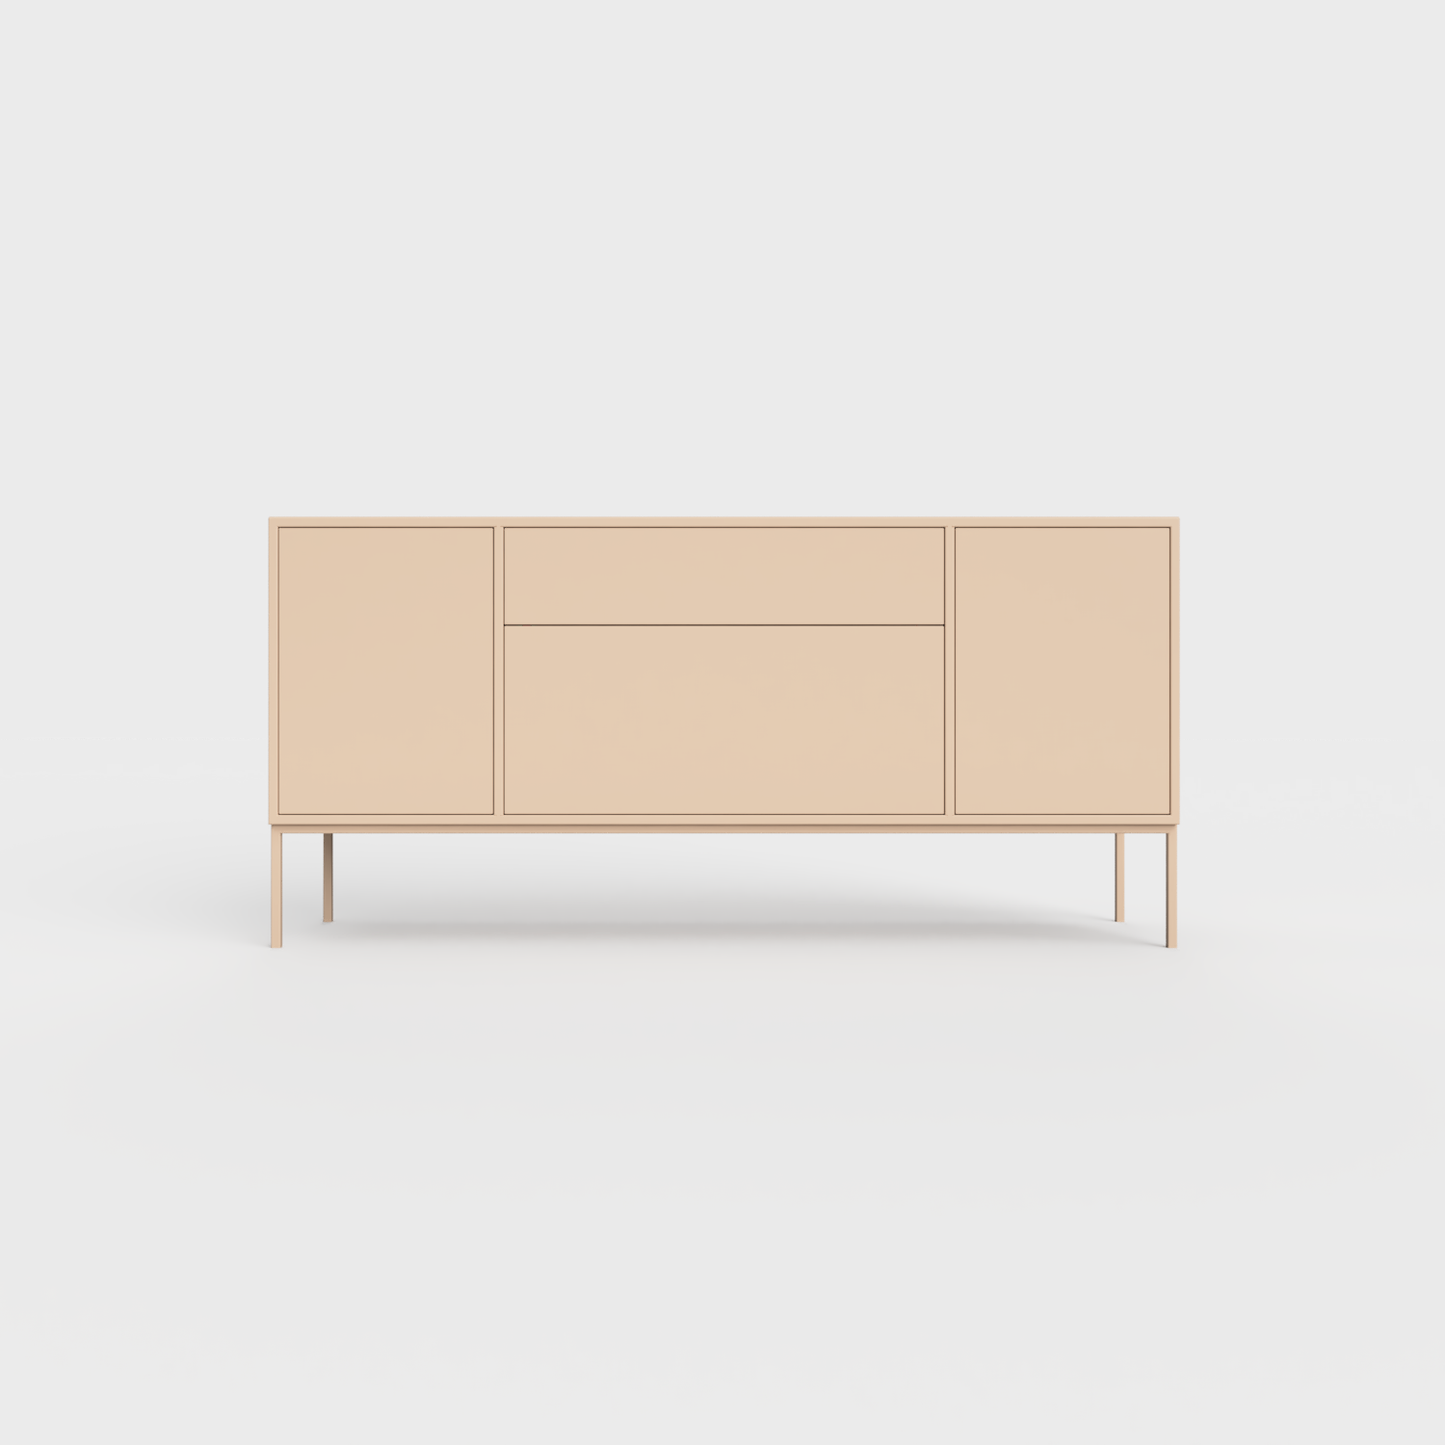 Arnika 02 Sideboard in Pastel Salmon color, powder-coated steel, elegant and modern piece of furniture for your living room